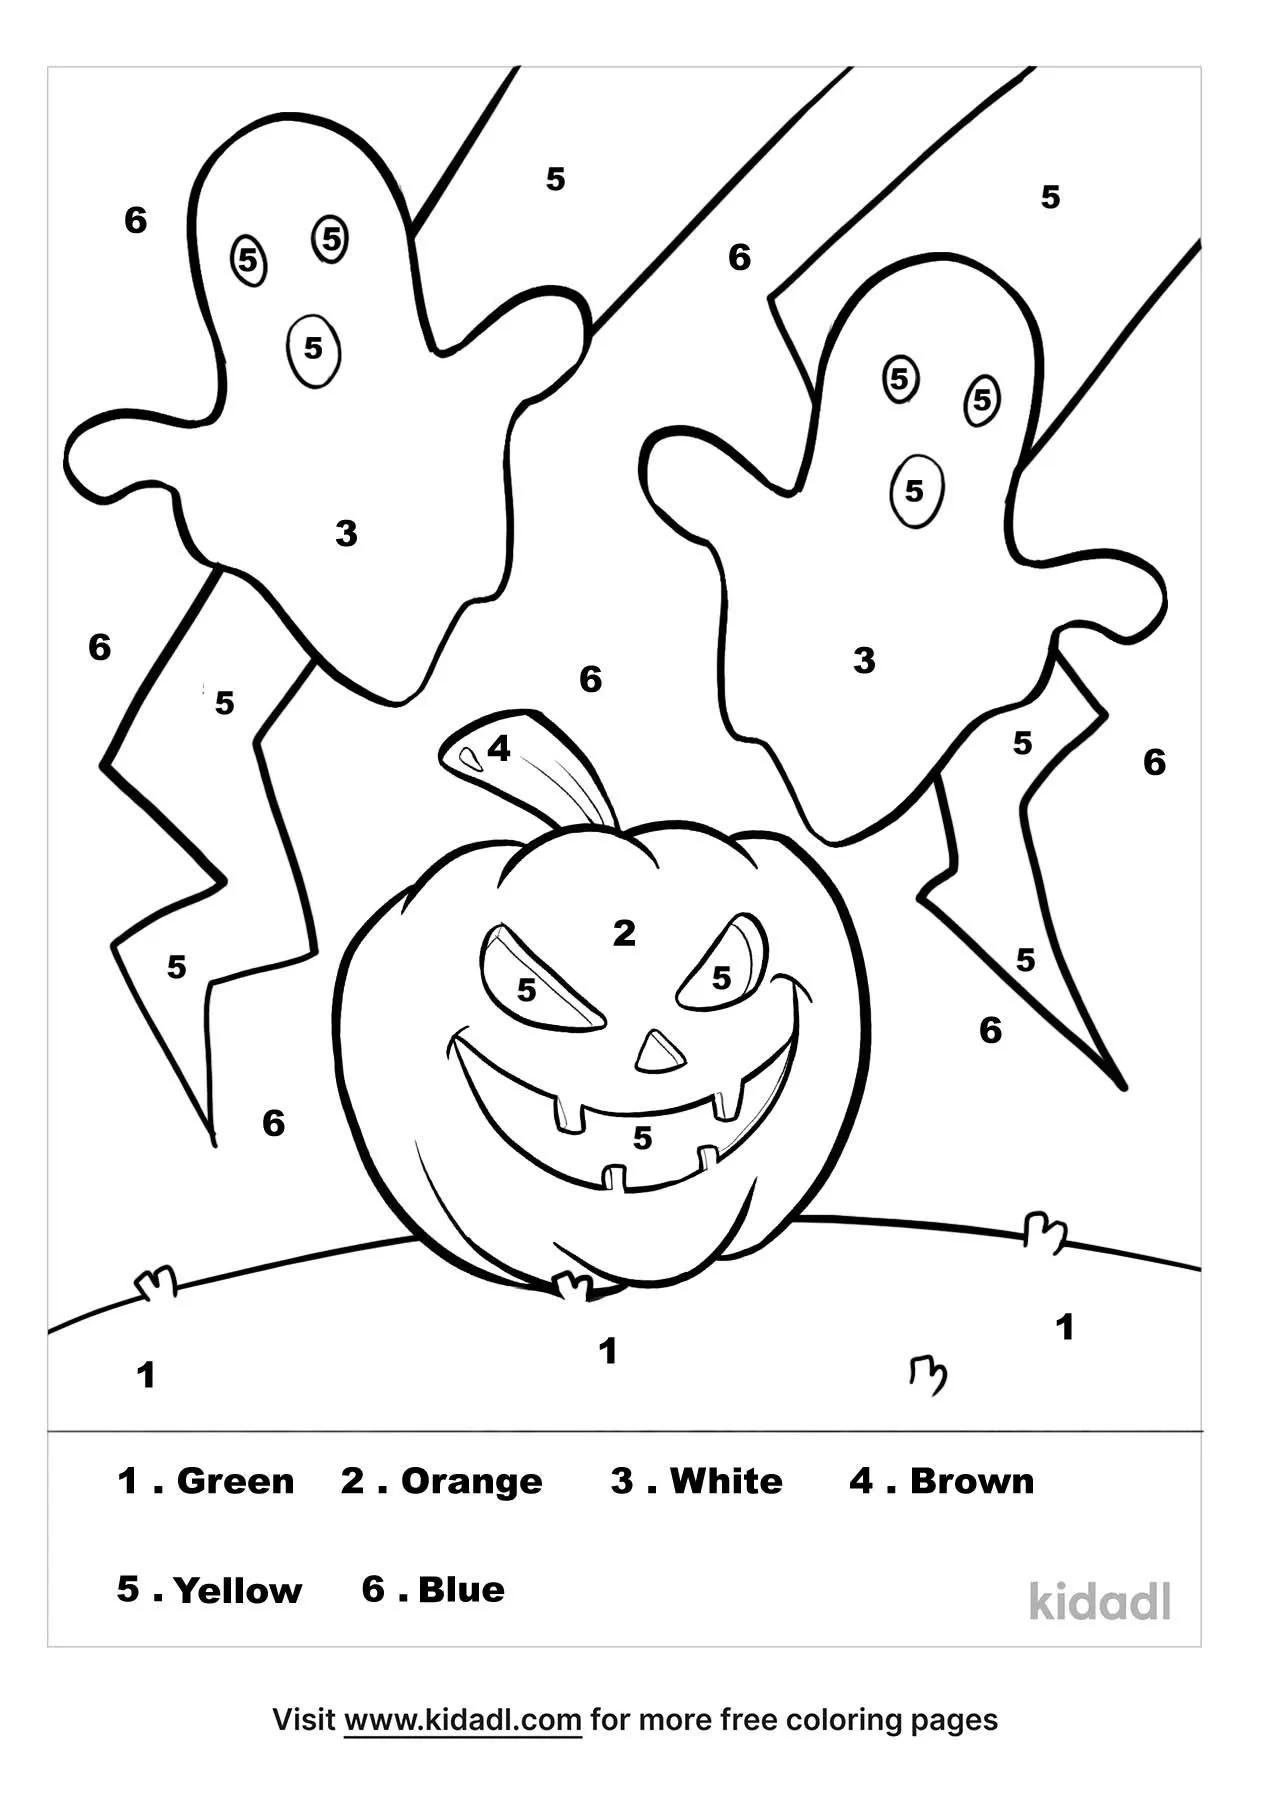 Halloween Color By Number Coloring Page | Free Color-by-number Coloring ...